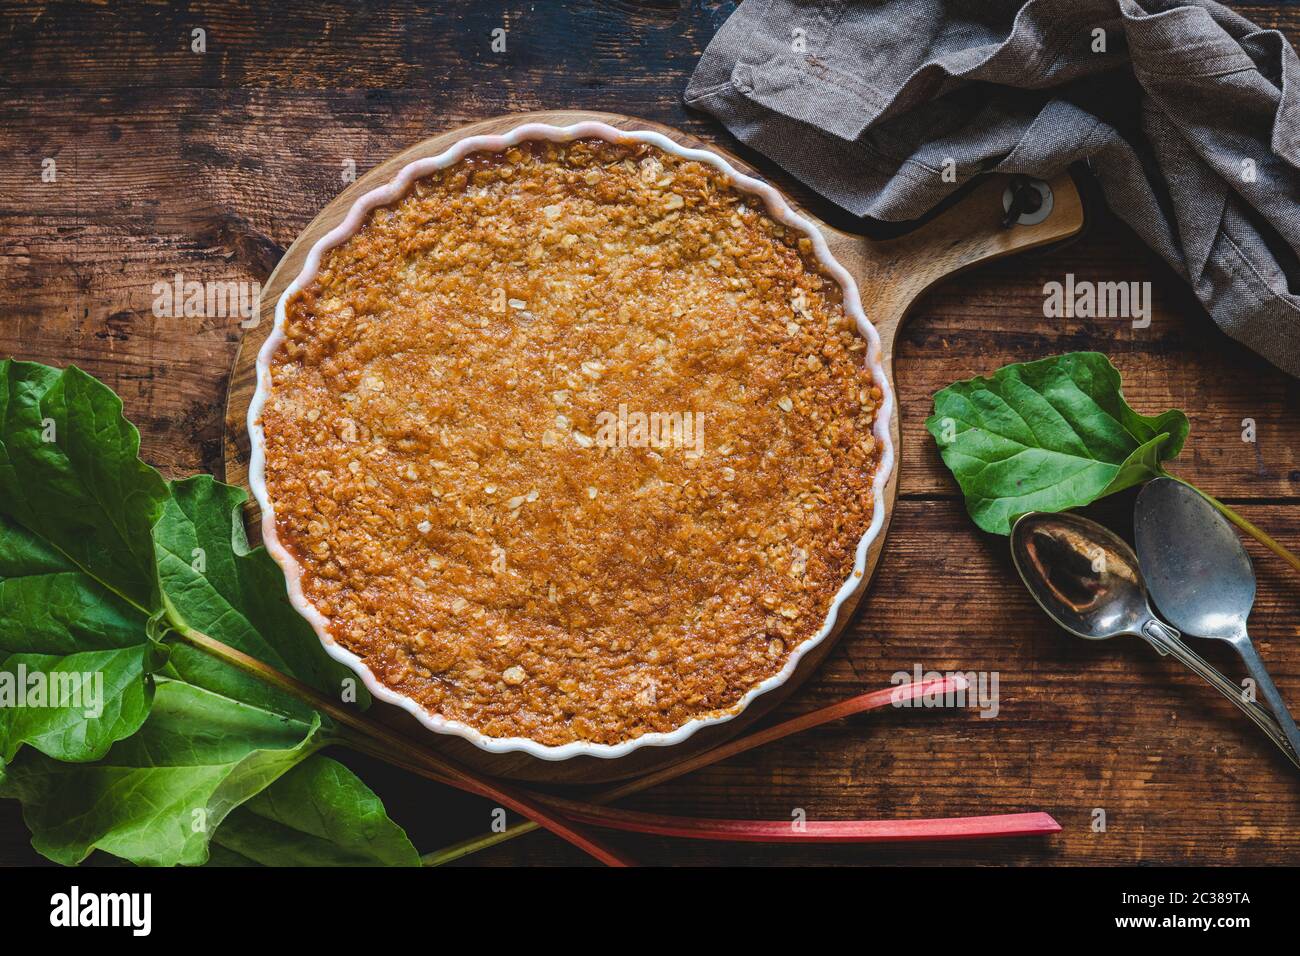 Traditional rhubarb pie on a rustic wooden table. The pie is with a toffee topping made of rolled oats, cream, syrup, sugar, flour and butter. Some sw Stock Photo